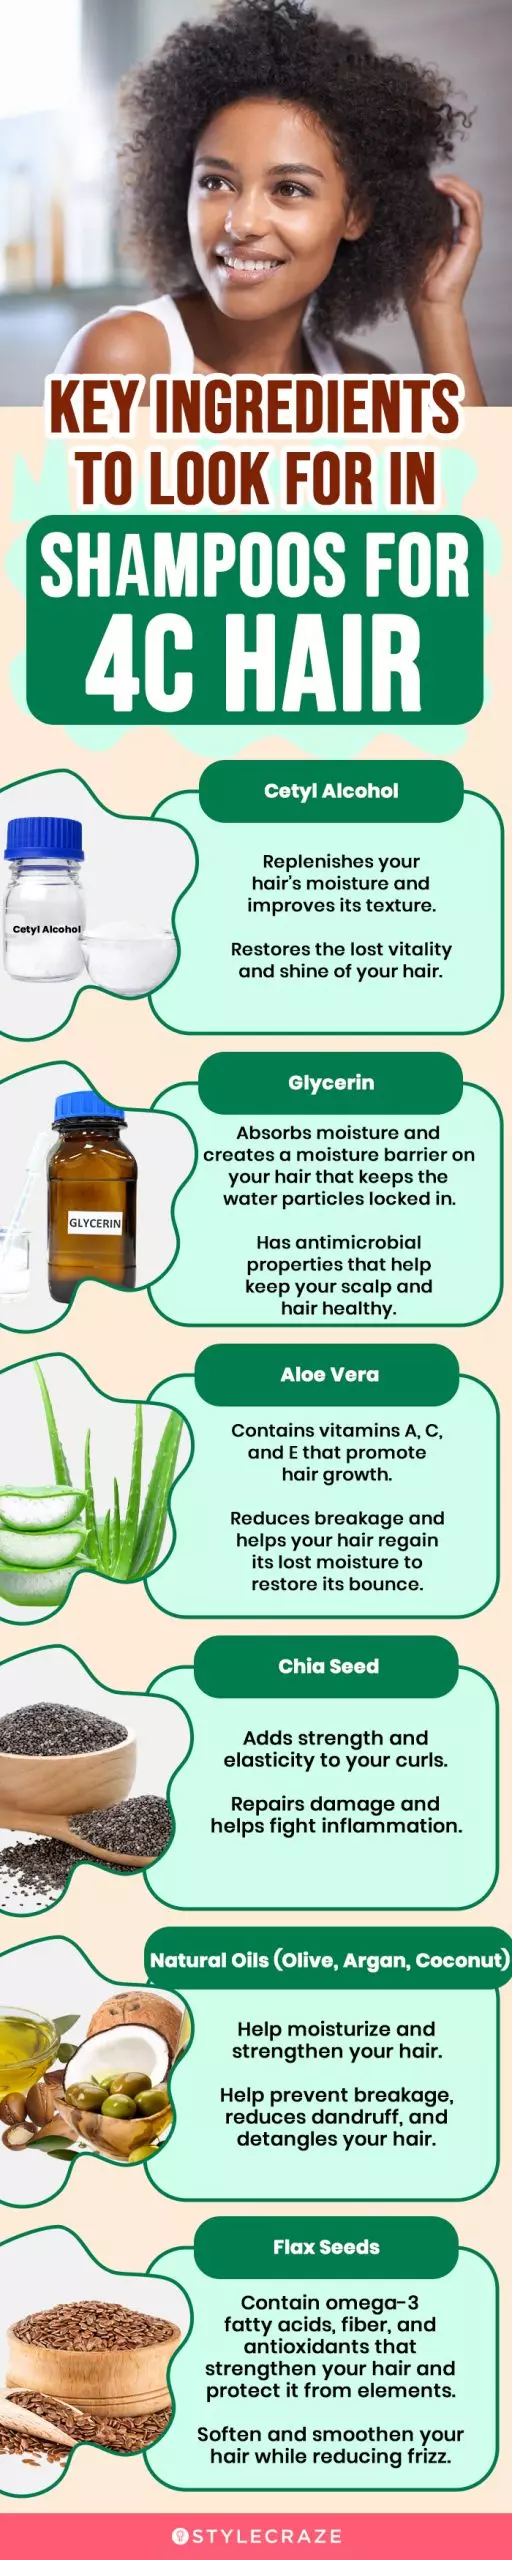 Key Ingredients To Look For In Shampoos For 4C Hair (infographic)